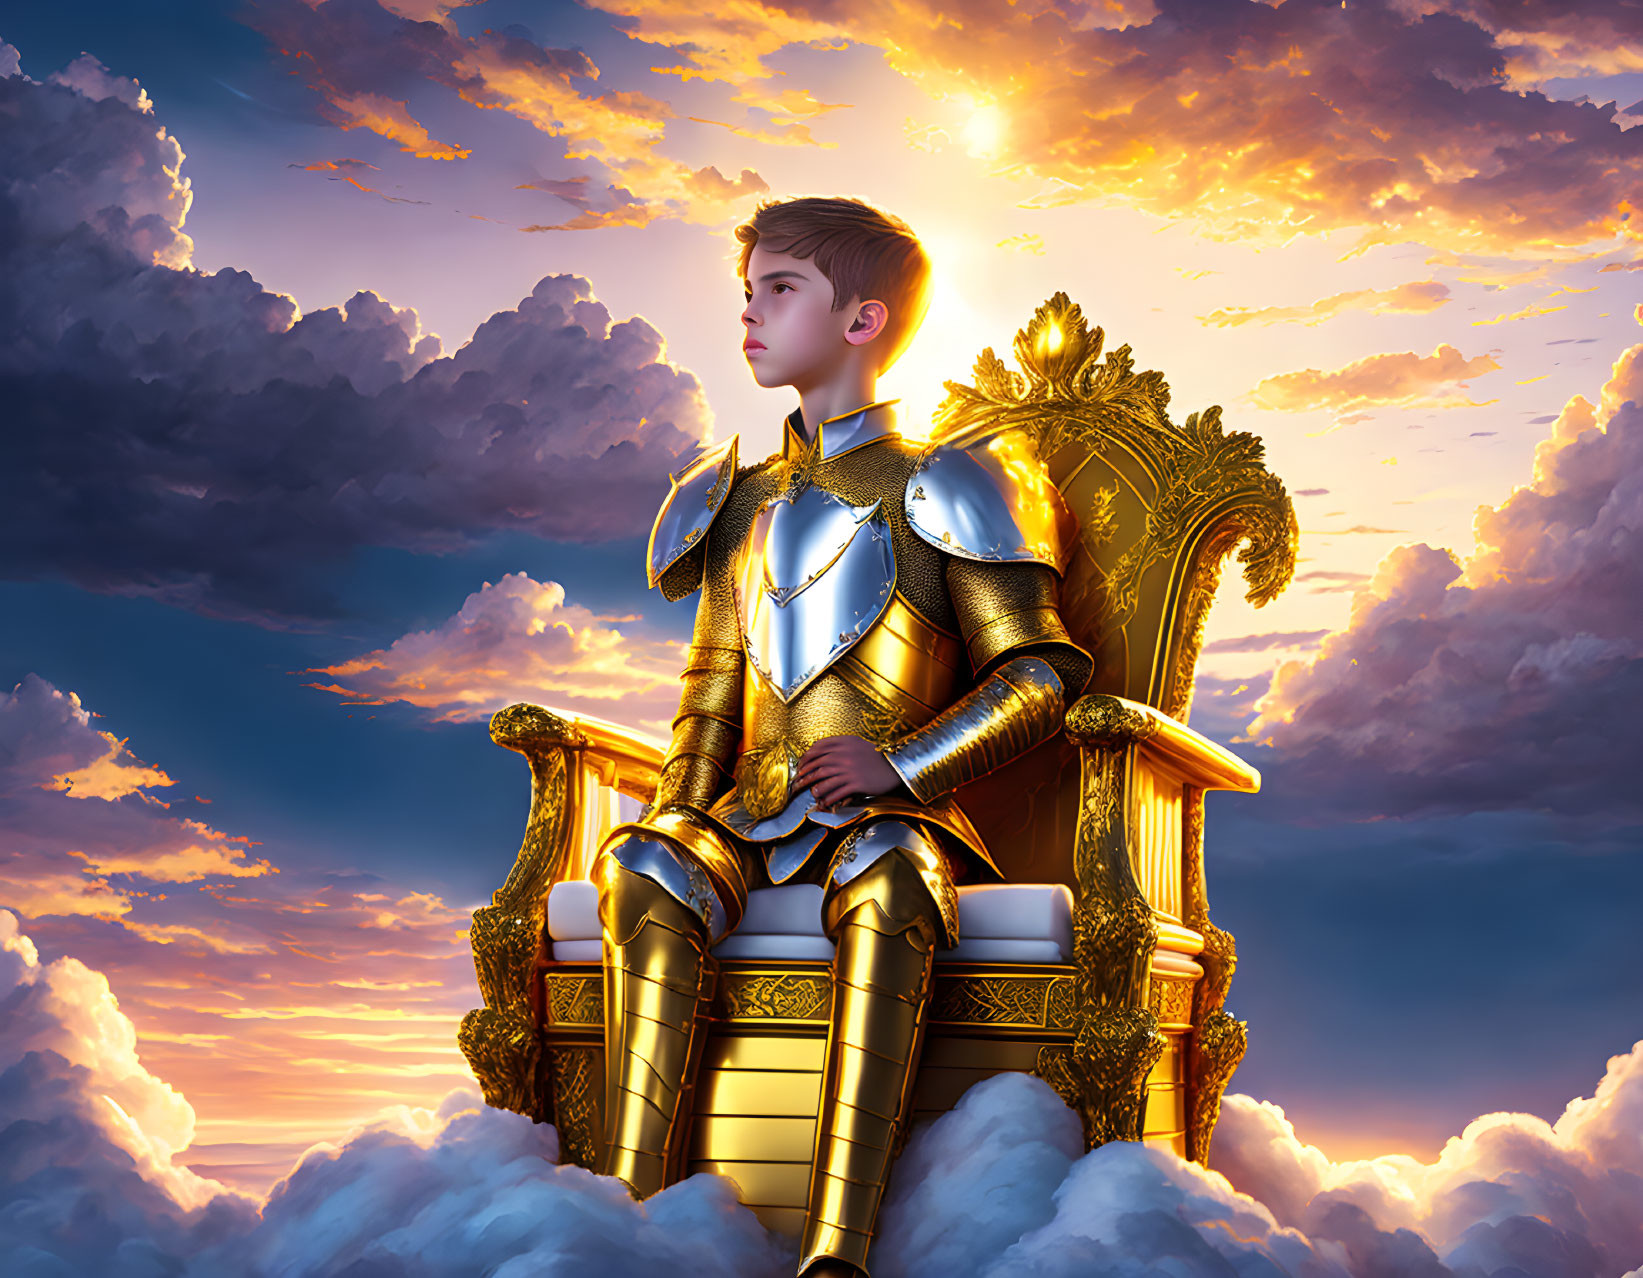 Young boy in shining armor on golden throne with dramatic sunset sky